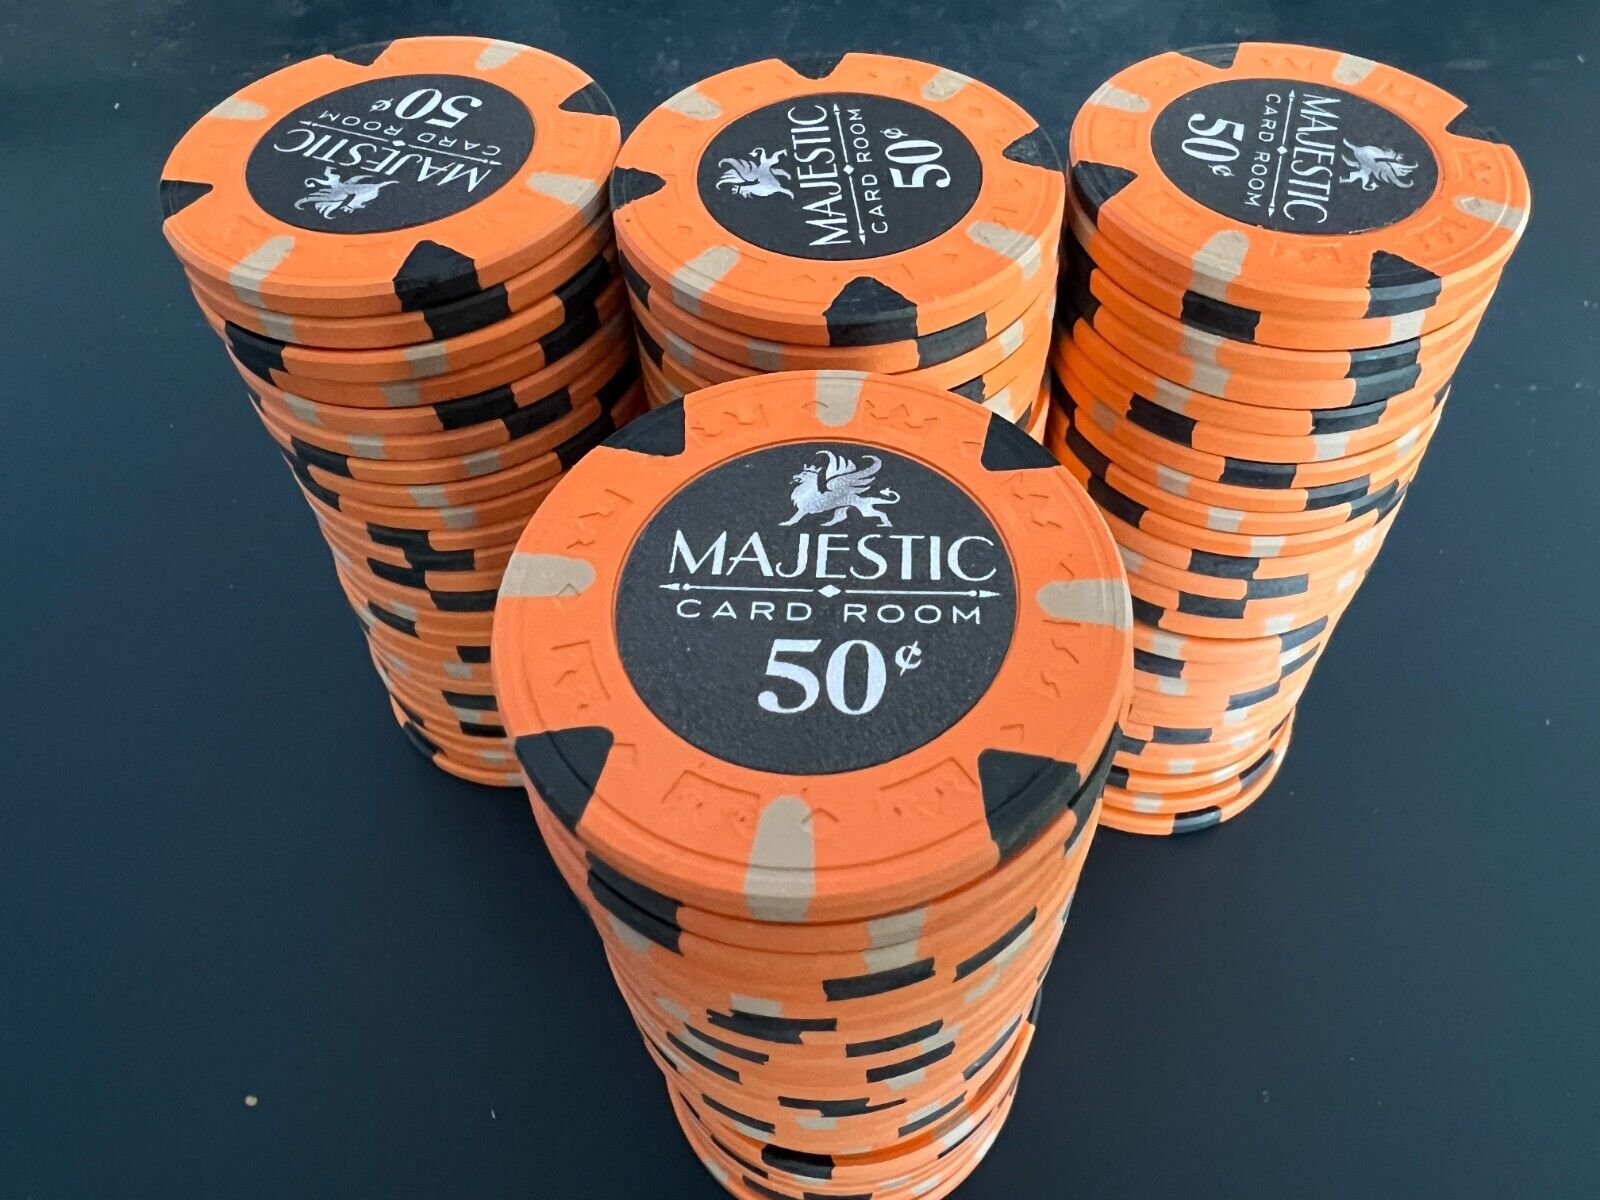 Majestic Card Room Clay Poker Chips, 50-cent denomination, 25 chips per pack.